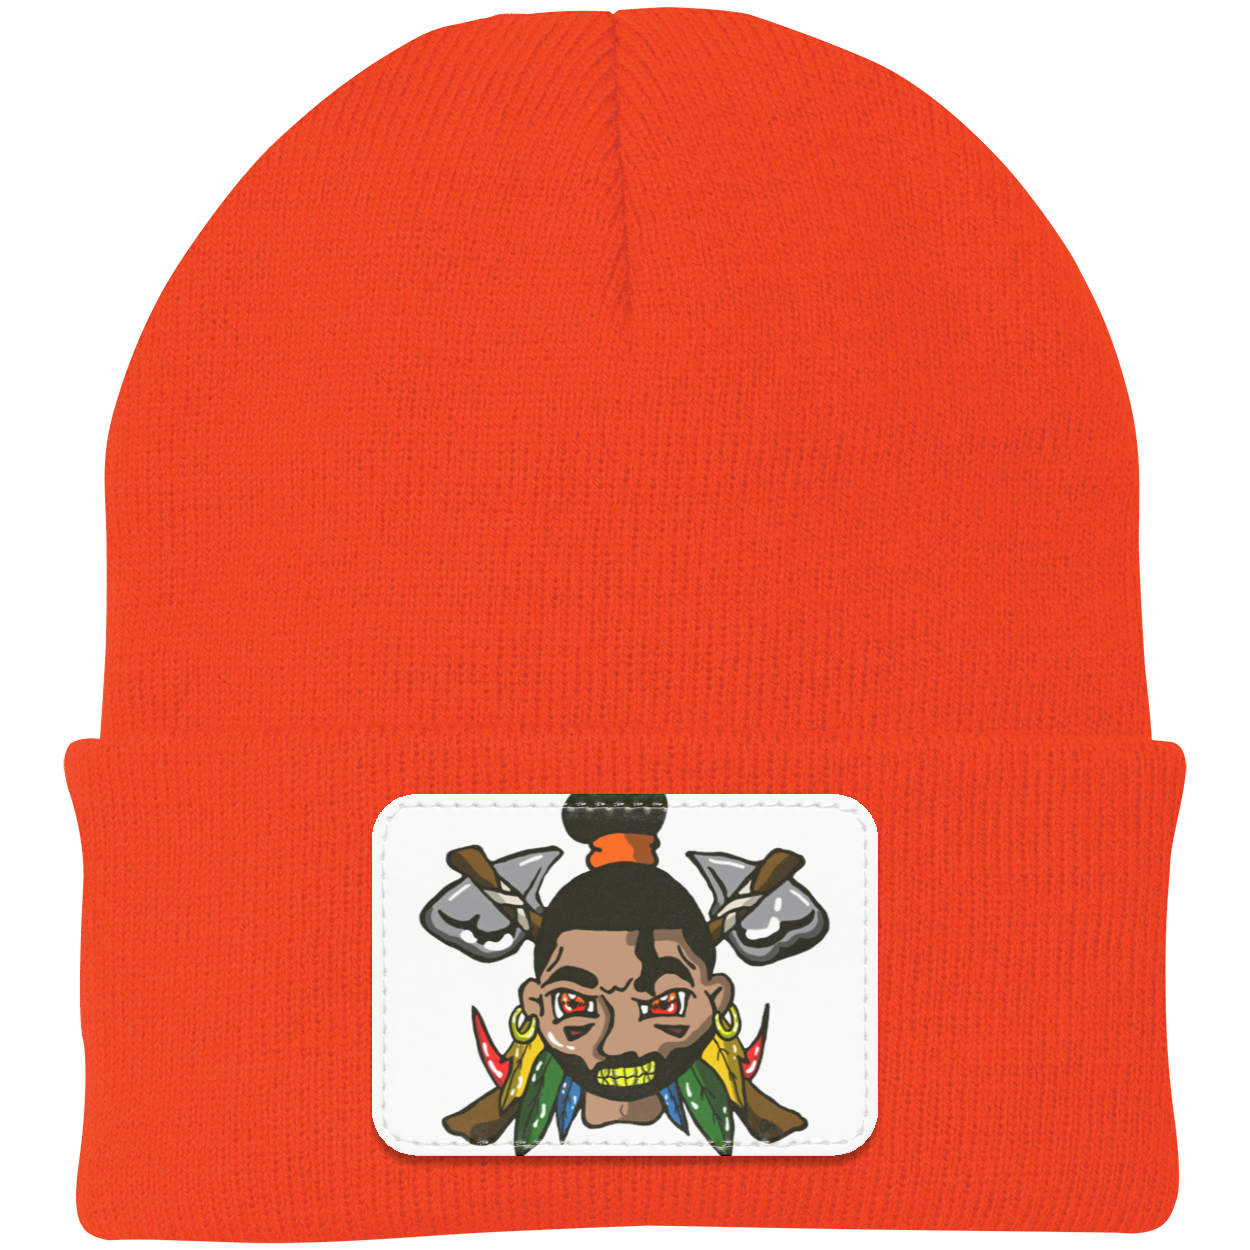 Day Life Knit Cap - Patch